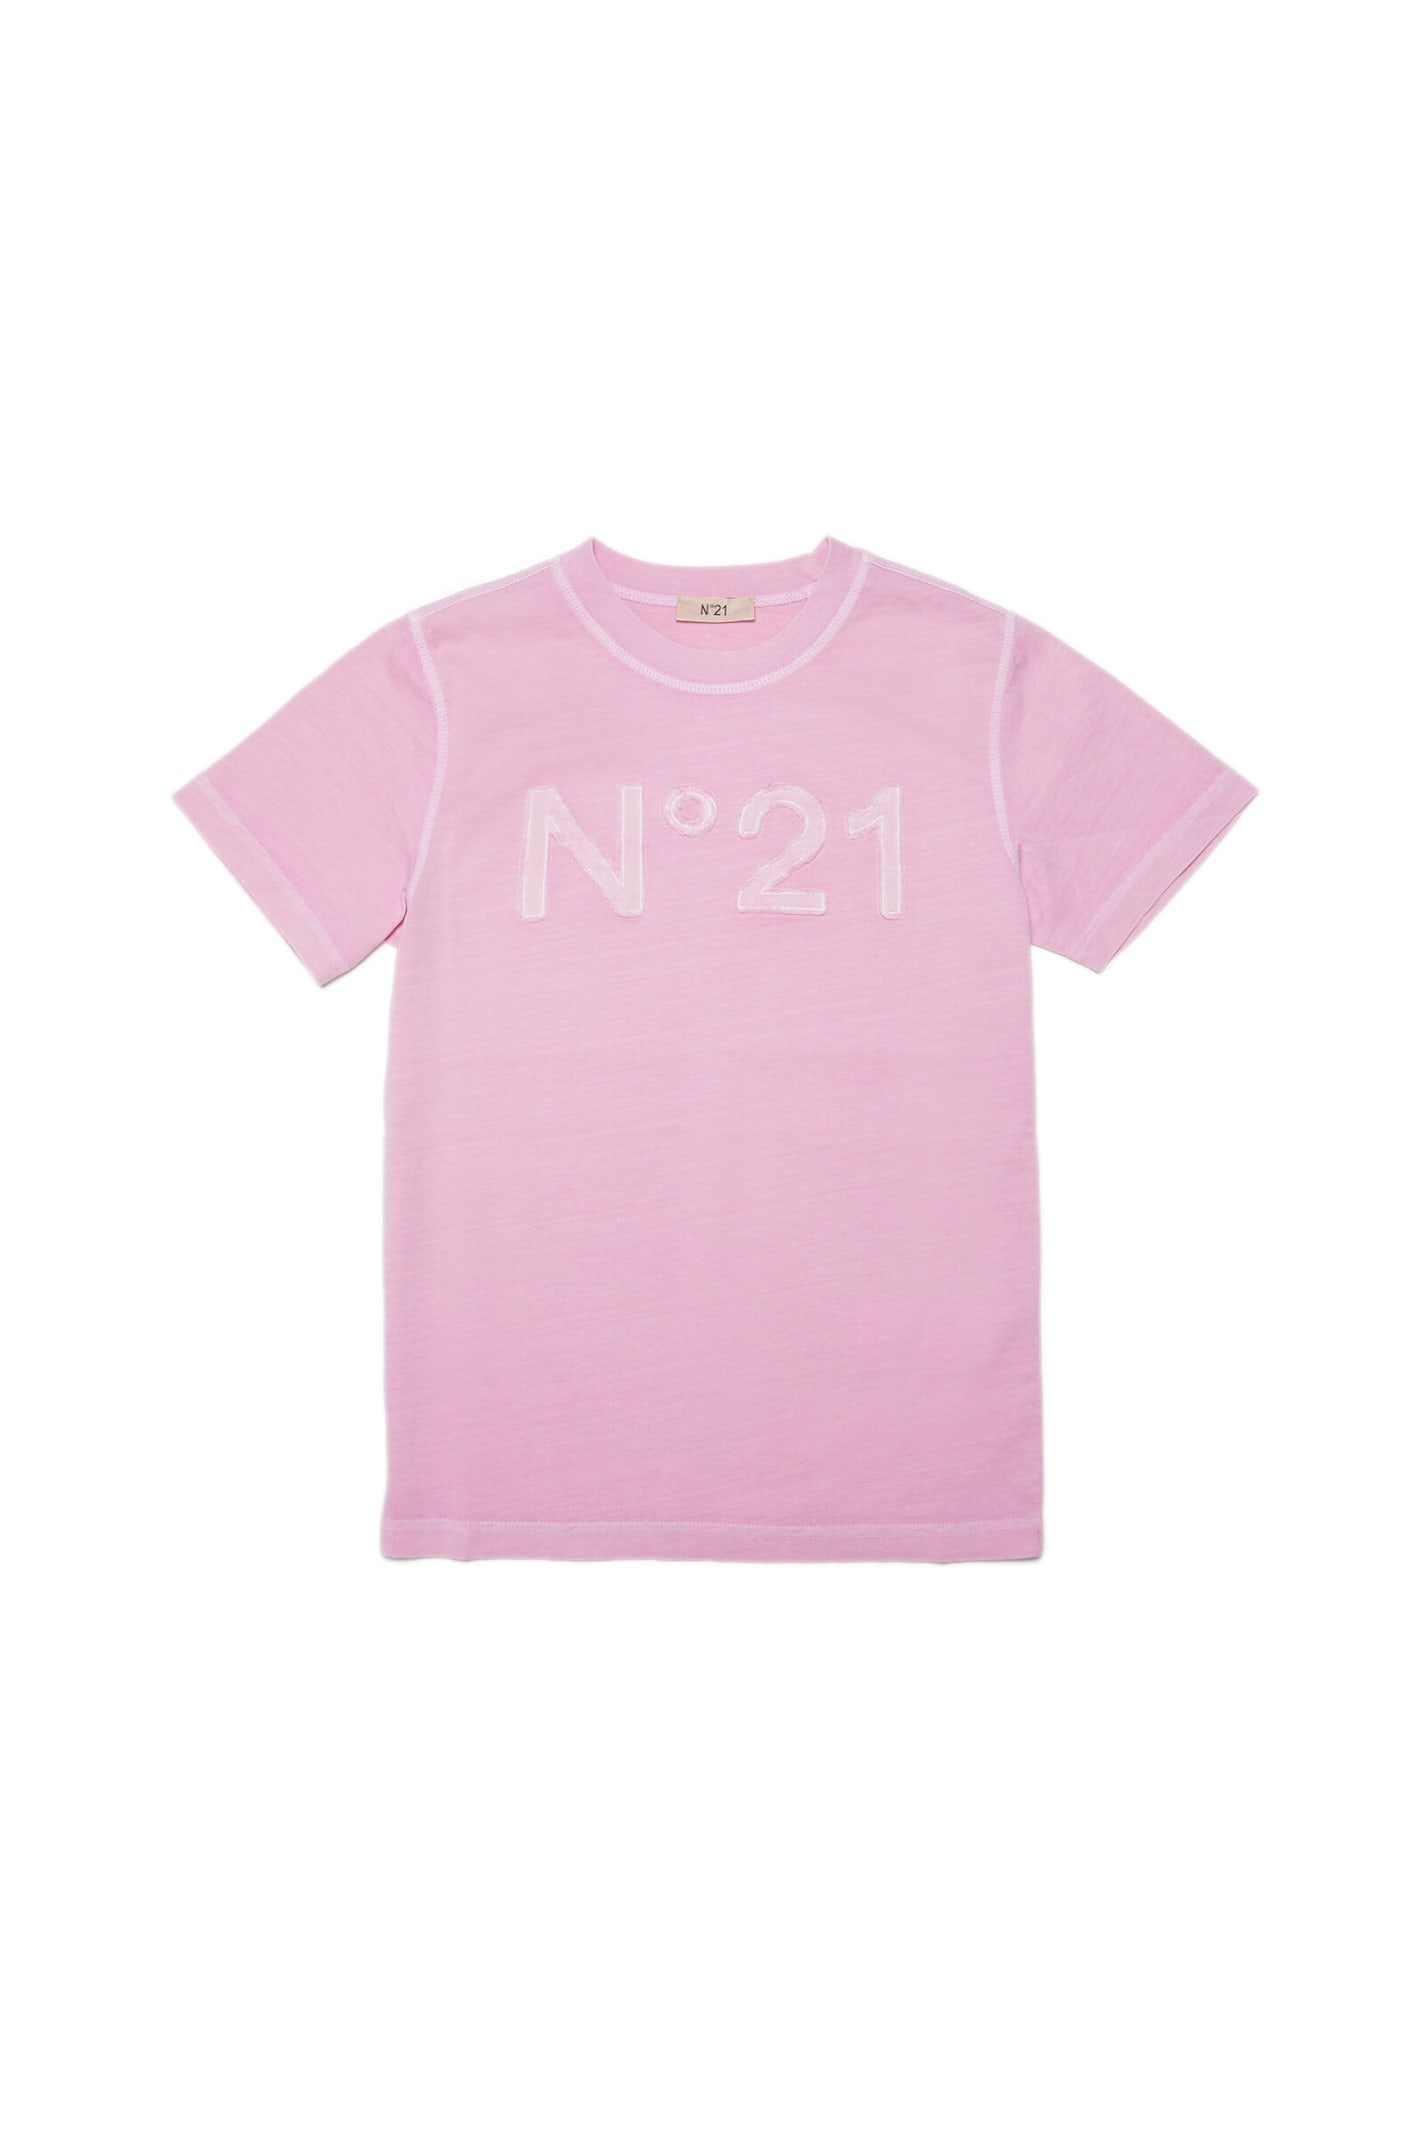 N°21 N21T159U T-SHIRT N°21 PINK T-SHIRT IN VINTAGE-EFFECT JERSEY WITH APPLIED LOGO